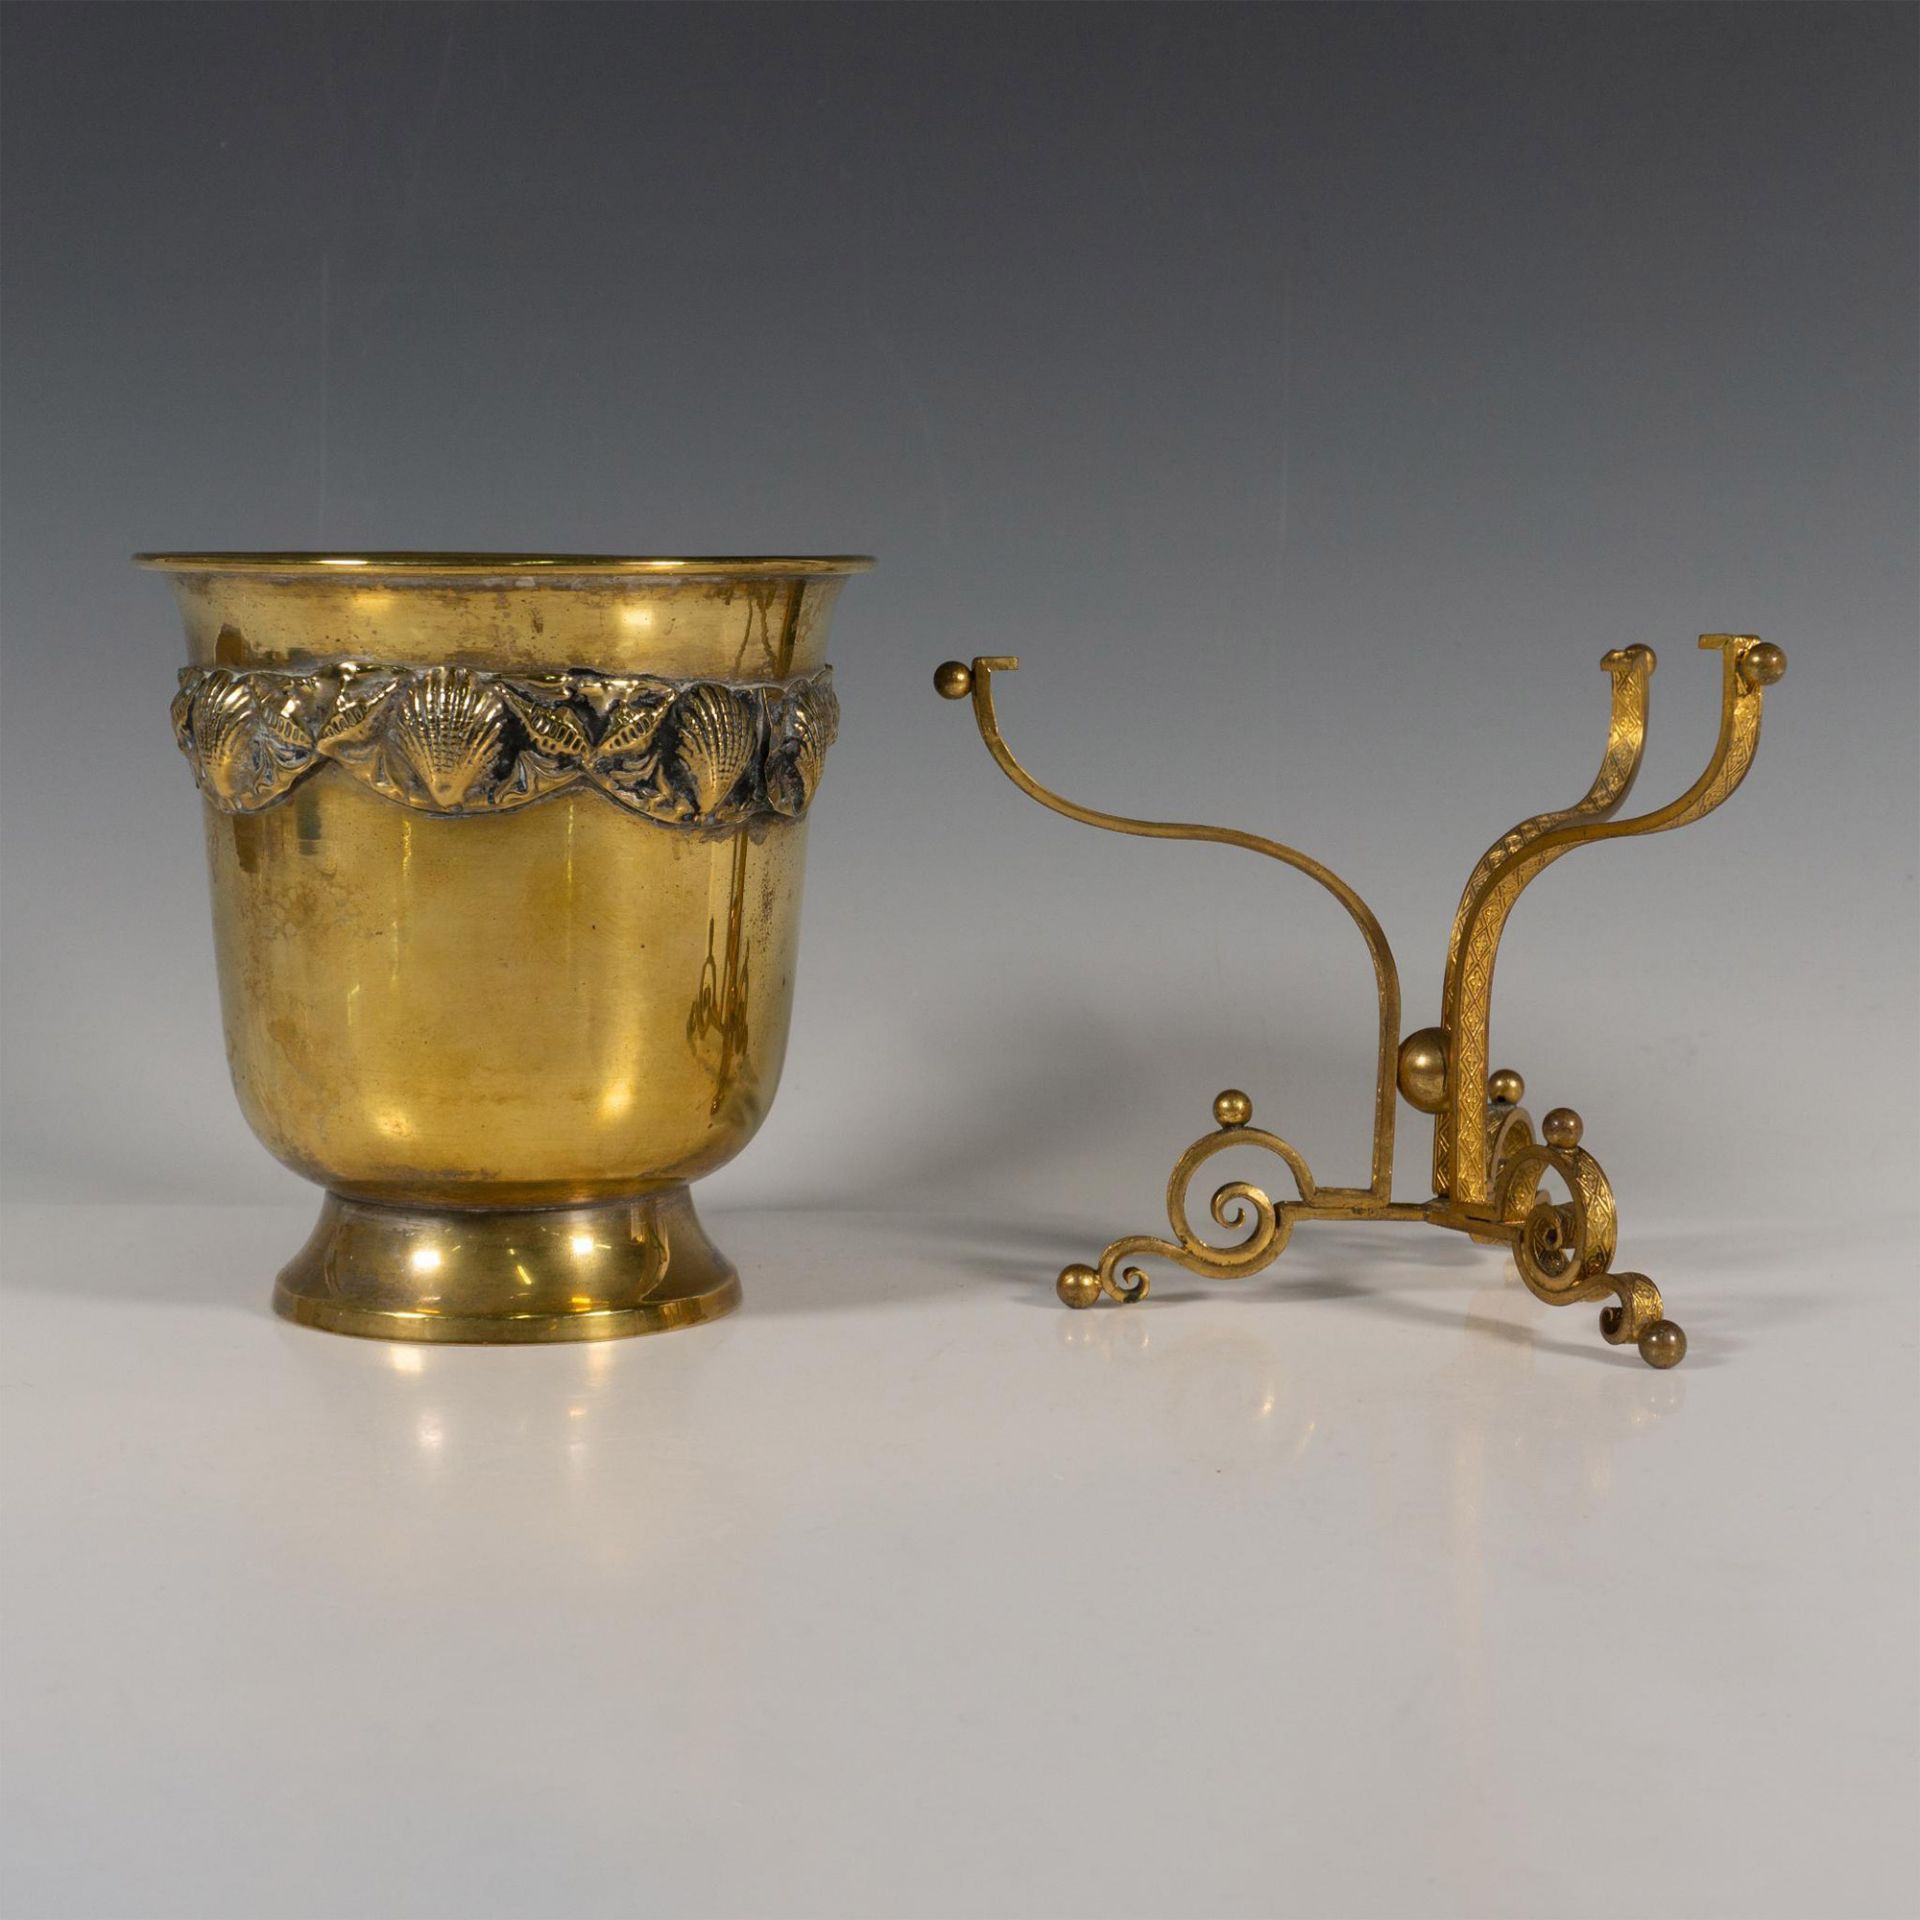 Decorative Brass Bowl with Marine Designs & Candle Holder